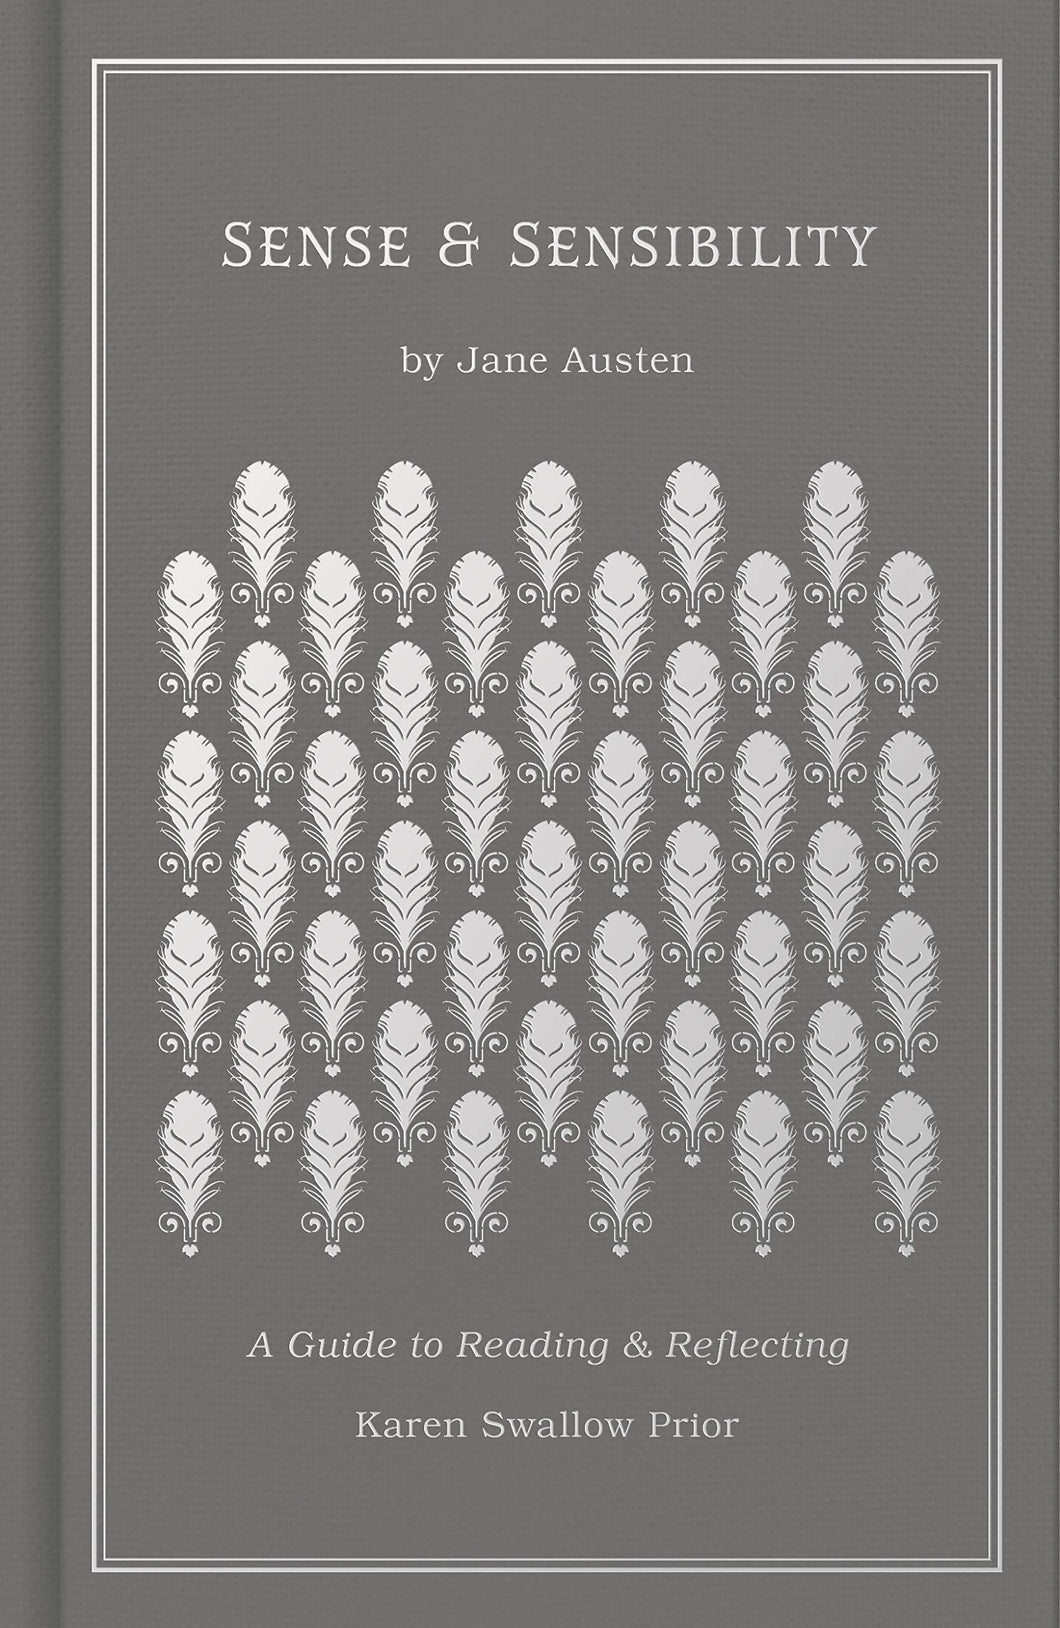 (Book) Sense and Sensibility: A Guide to Reading and Reflecting